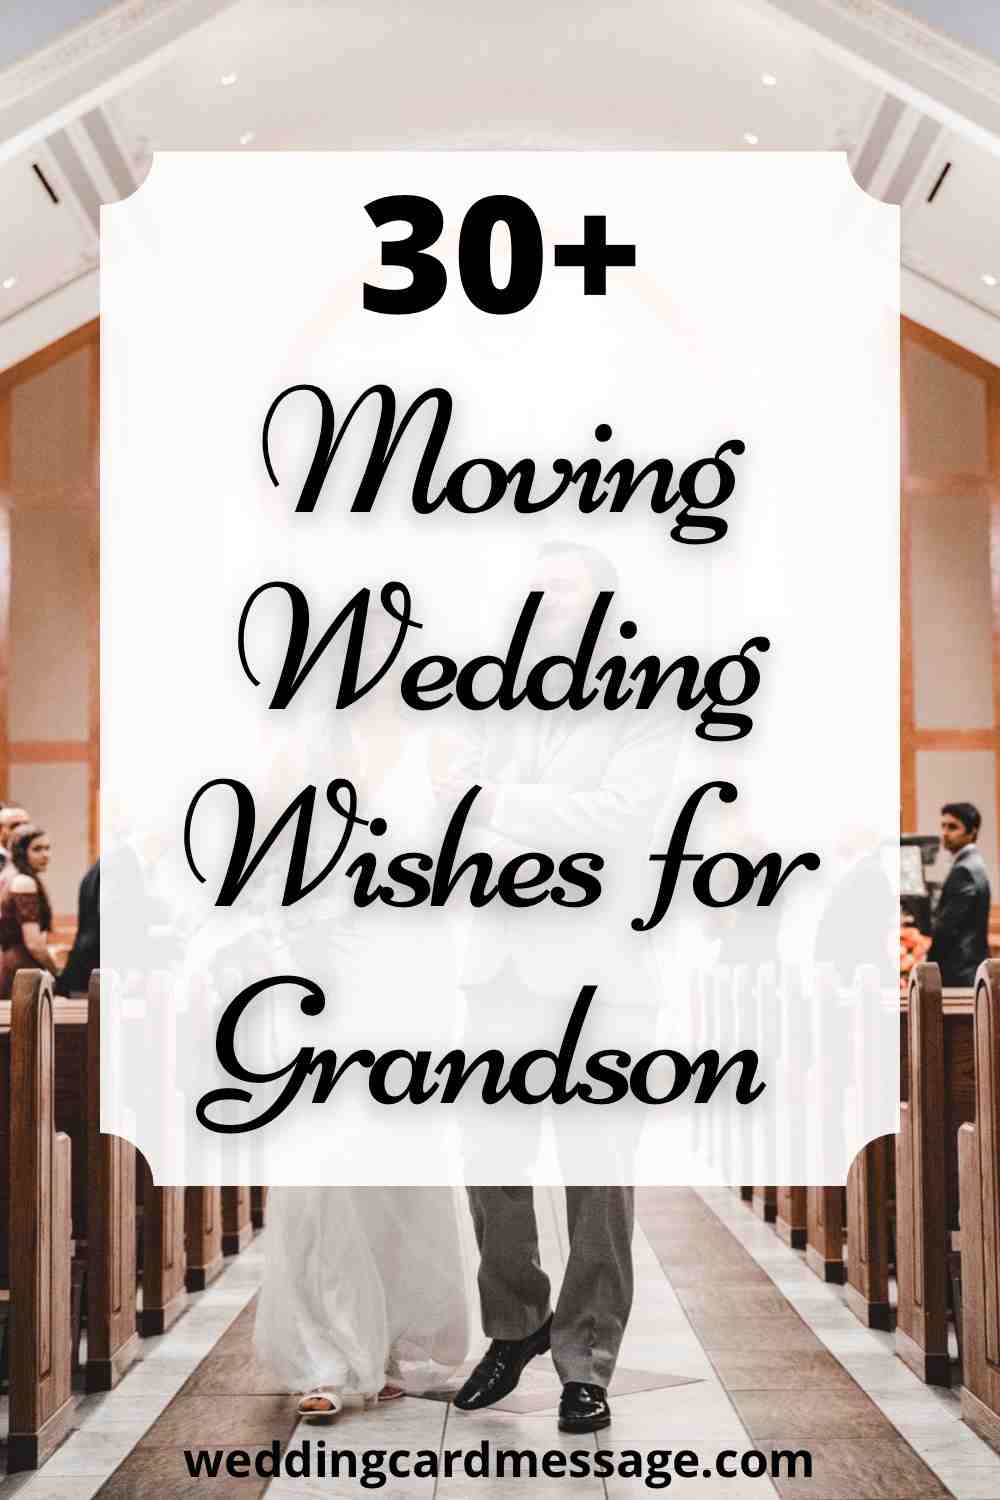 Wedding wishes for grandson